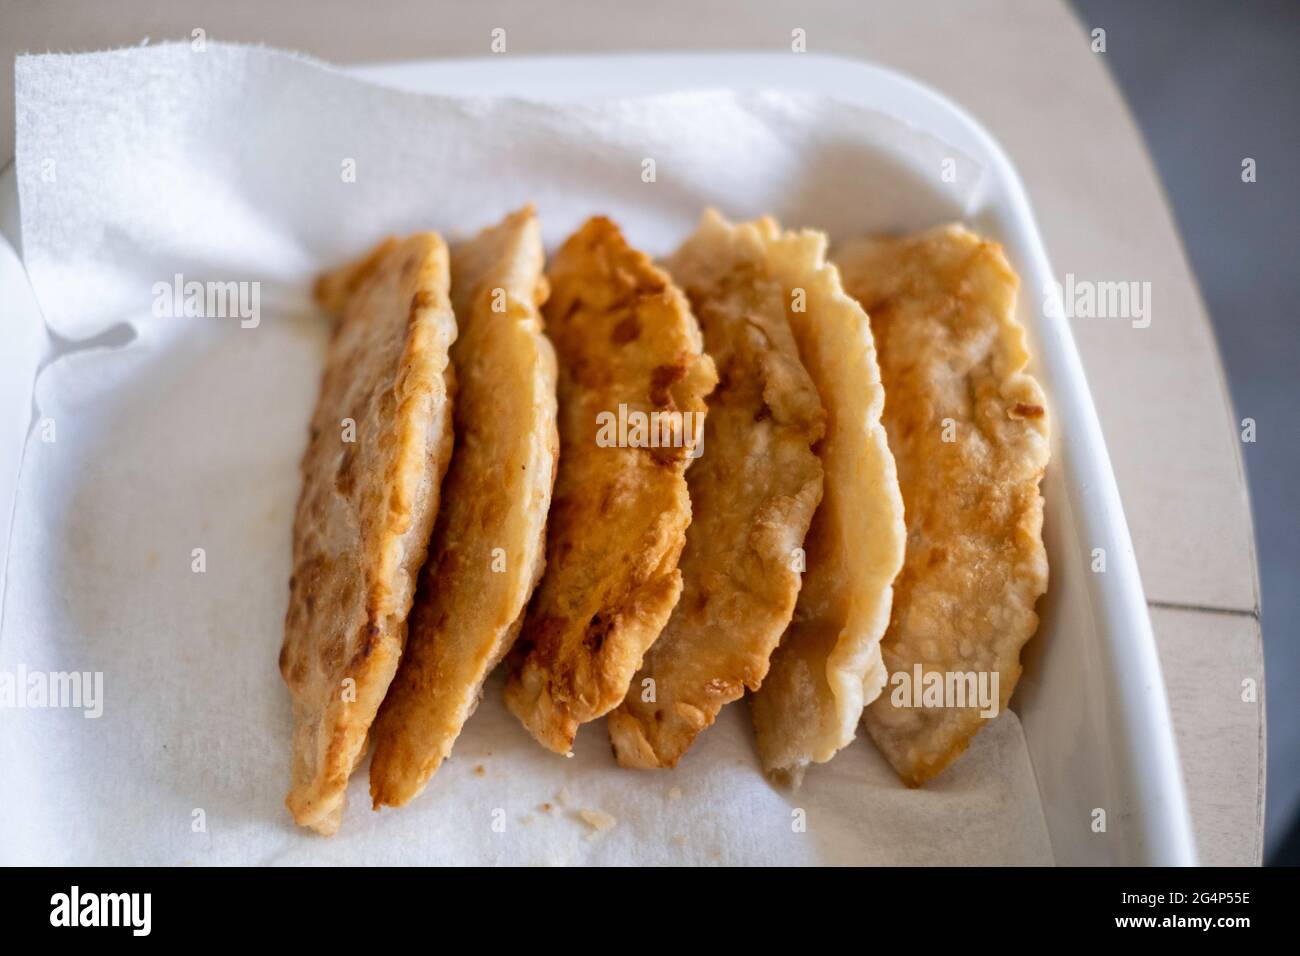 Homemade fried apple pies made from dried apples with flaky homemade pie crust on draining on a paper towel. Stock Photo